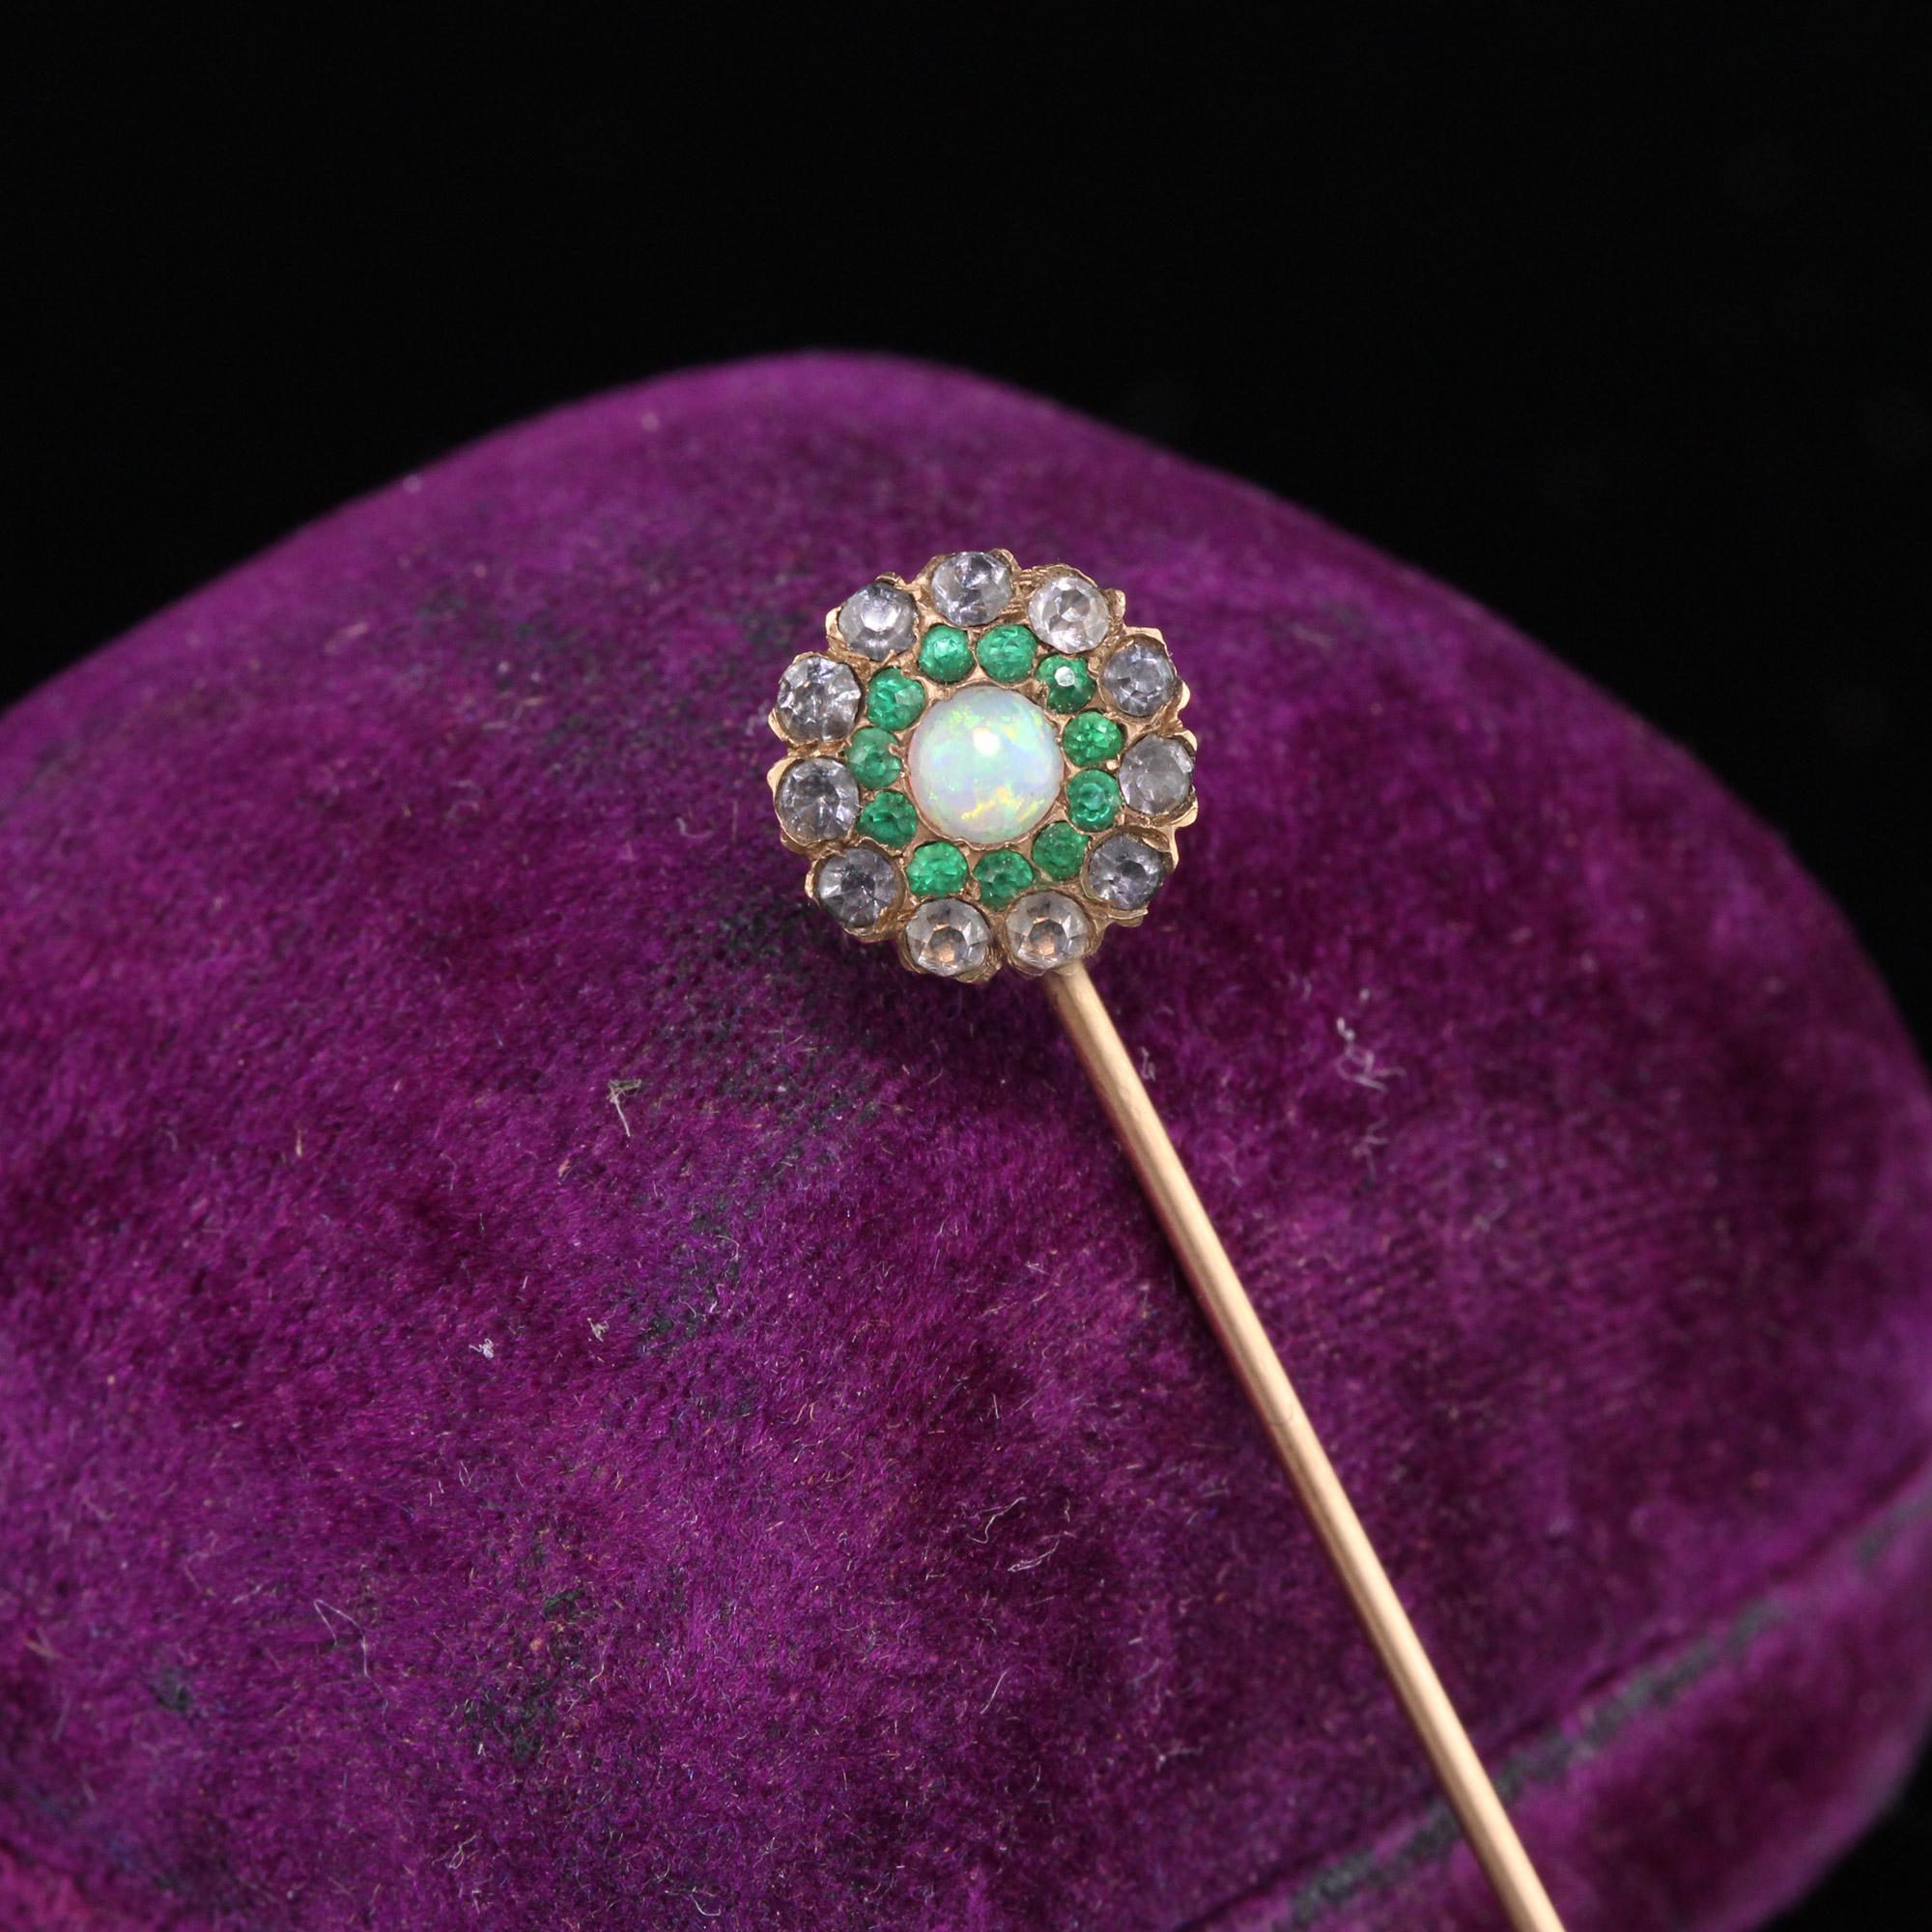 Victorian Stick Pin with an opal center surrounded by a halo of green paste and grey paste.

Metal: 14K Rose Gold 

Weight: 1.3 Grams

Measurements: Head measures 9.7 mm in circumference 